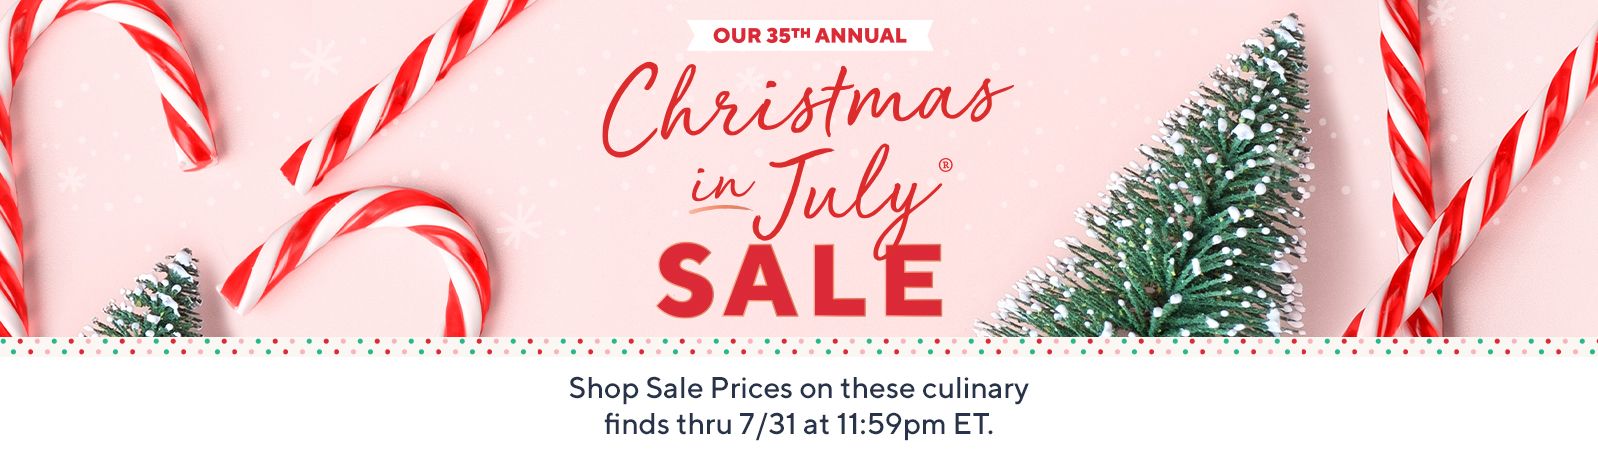 Christmas in July® Sale:  Shop Sale Prices on these culinary finds thru 7/31 at 11:59pm ET.